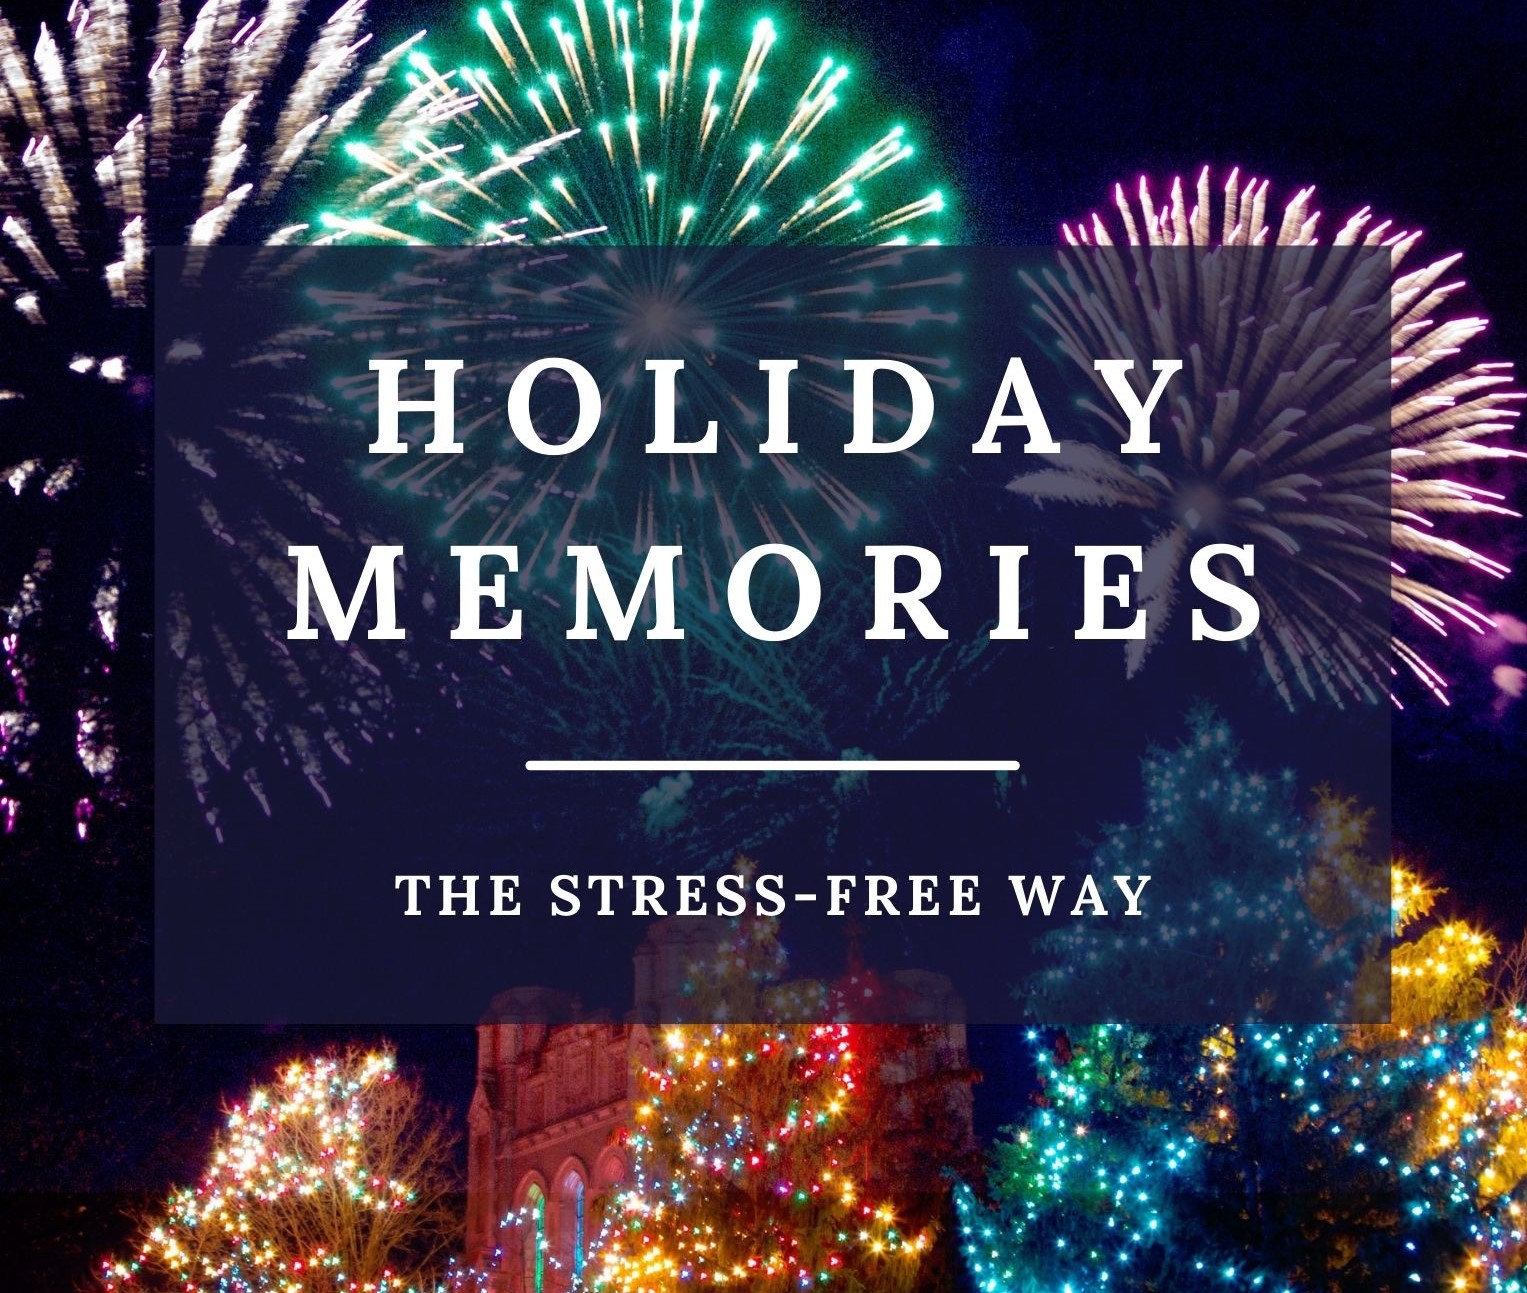 Reduce Holiday Stress With Tips From Integrative Wellness Coach